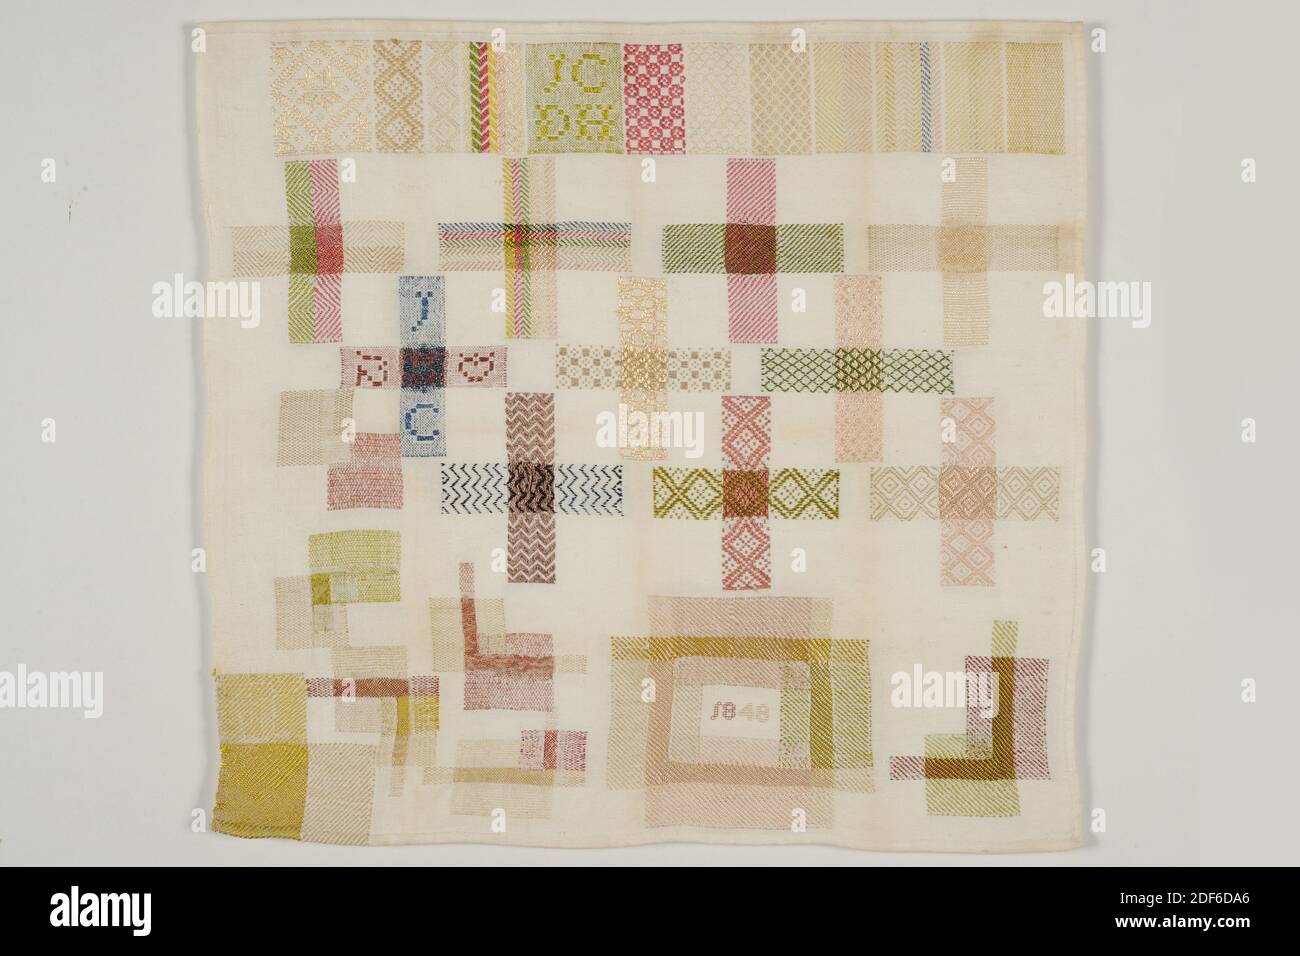 stoplap, J.C. de Haas, 1848, cotton, silk, General: 48 x 51cm (480 x 510mm), Stoplap of cotton with matting binding stopped with silk. The patch has various plugs and tapped edges in various colors and patterns. In the top edge the initials JCDH in green letters, in the bottom row in a rectangle the year 1848. The topstitches on the top row are mainly twill weave with fantasy patterns. The cross-caps underneath in check pattern twill, plain weave, eyelet twill, pointed twill and diamond twill. At the bottom there are various snags and a rectangular cut-out piece of fabric Stock Photo